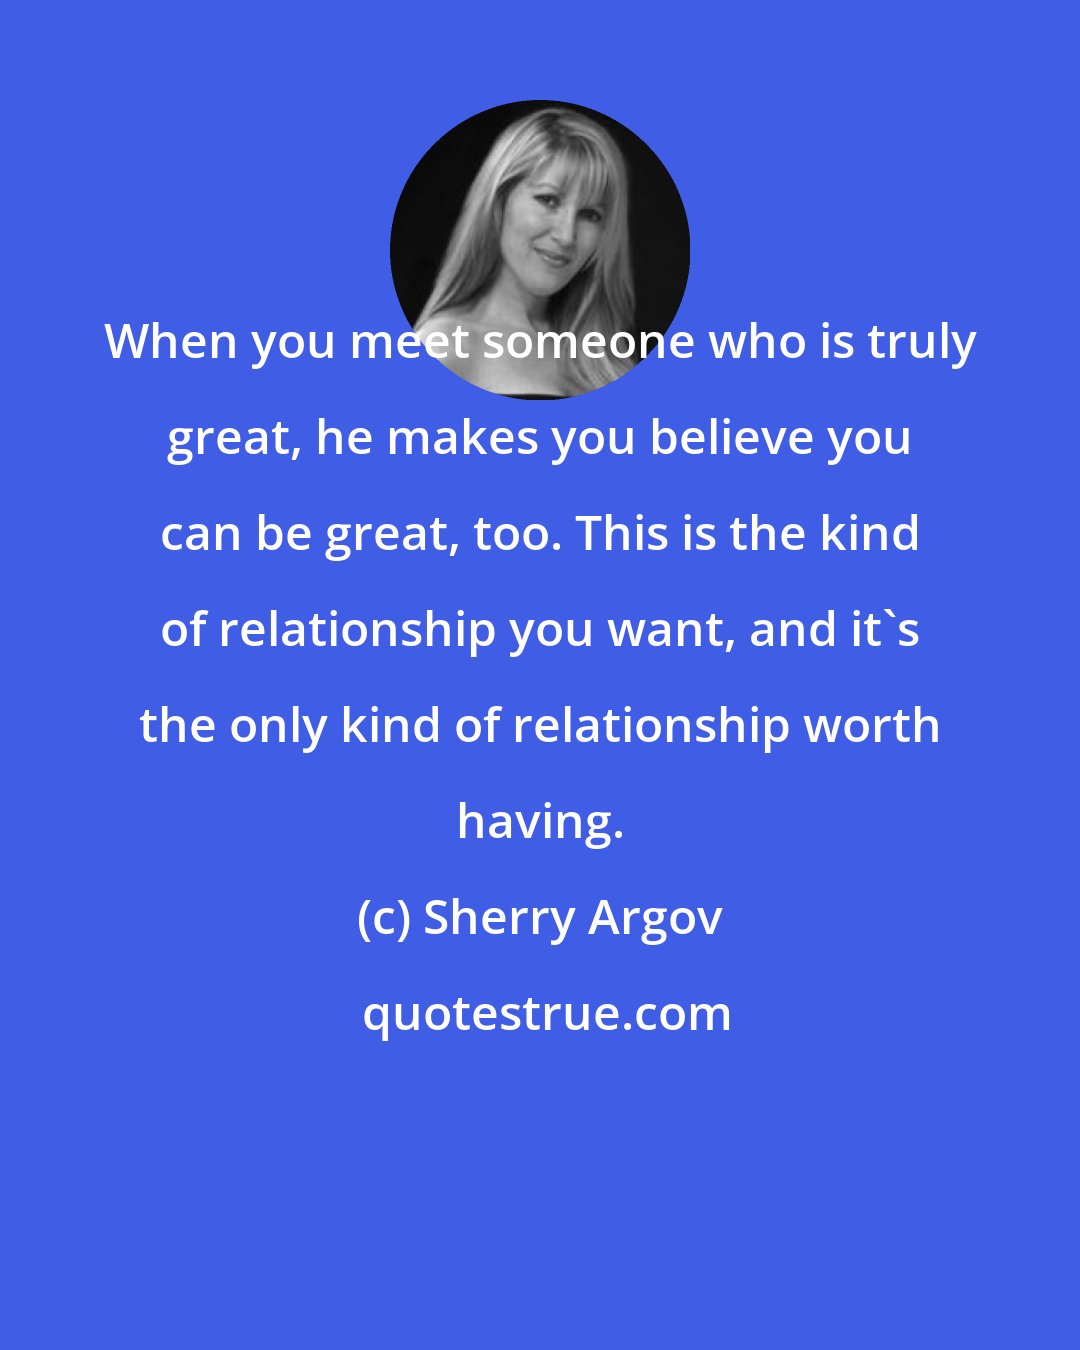 Sherry Argov: When you meet someone who is truly great, he makes you believe you can be great, too. This is the kind of relationship you want, and it's the only kind of relationship worth having.